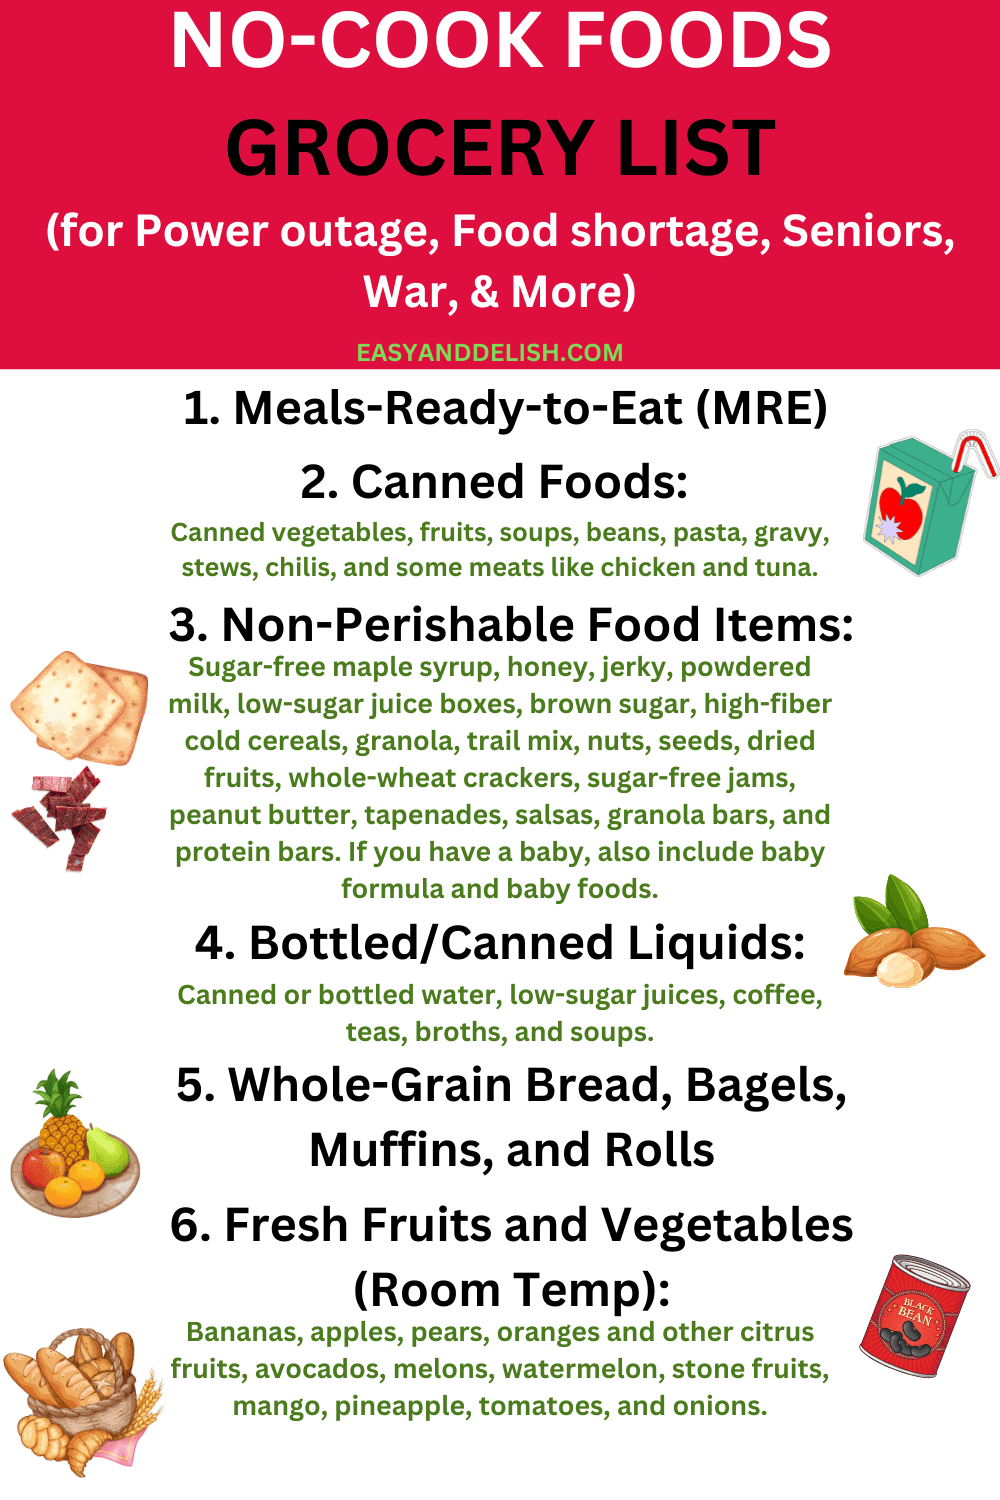 no-cook foods grocery list infographic.